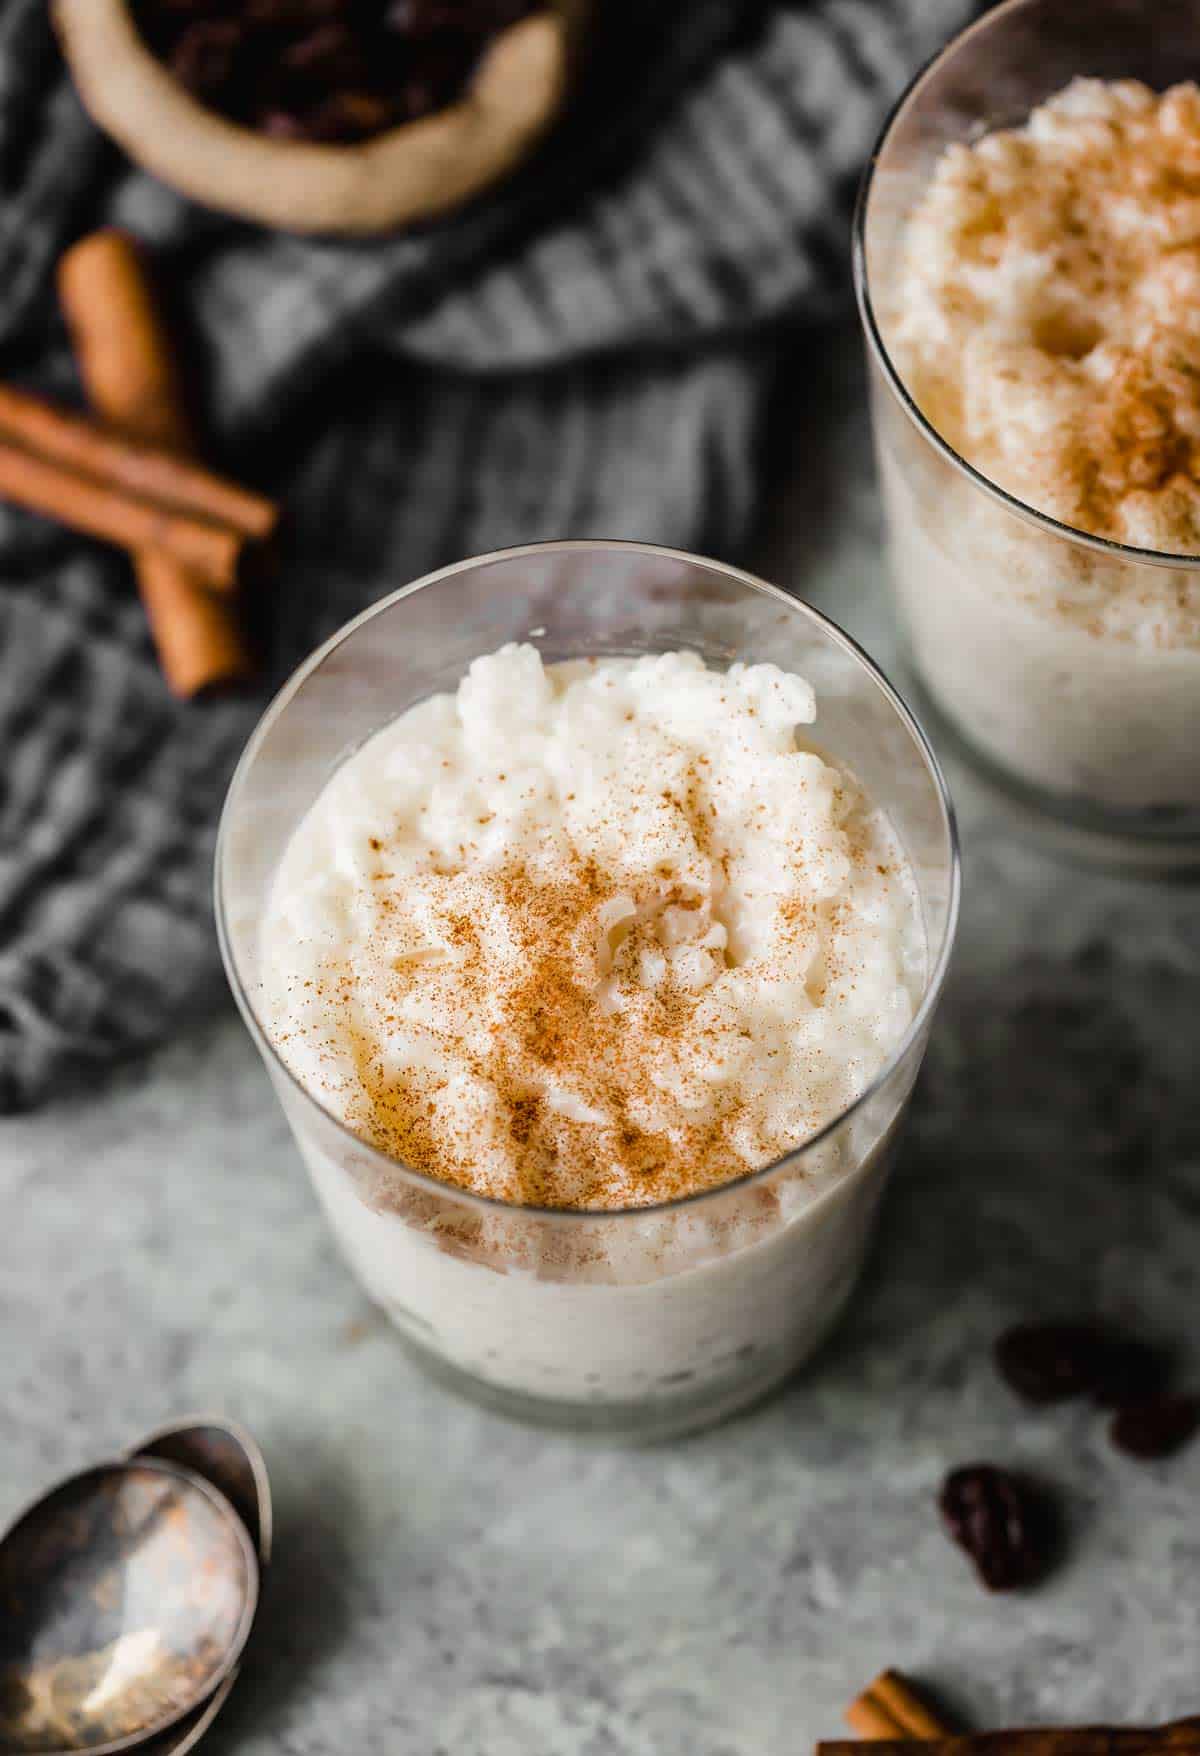 A glass cup filled with Mexican rice pudding that's sprinkled with ground cinnamon.